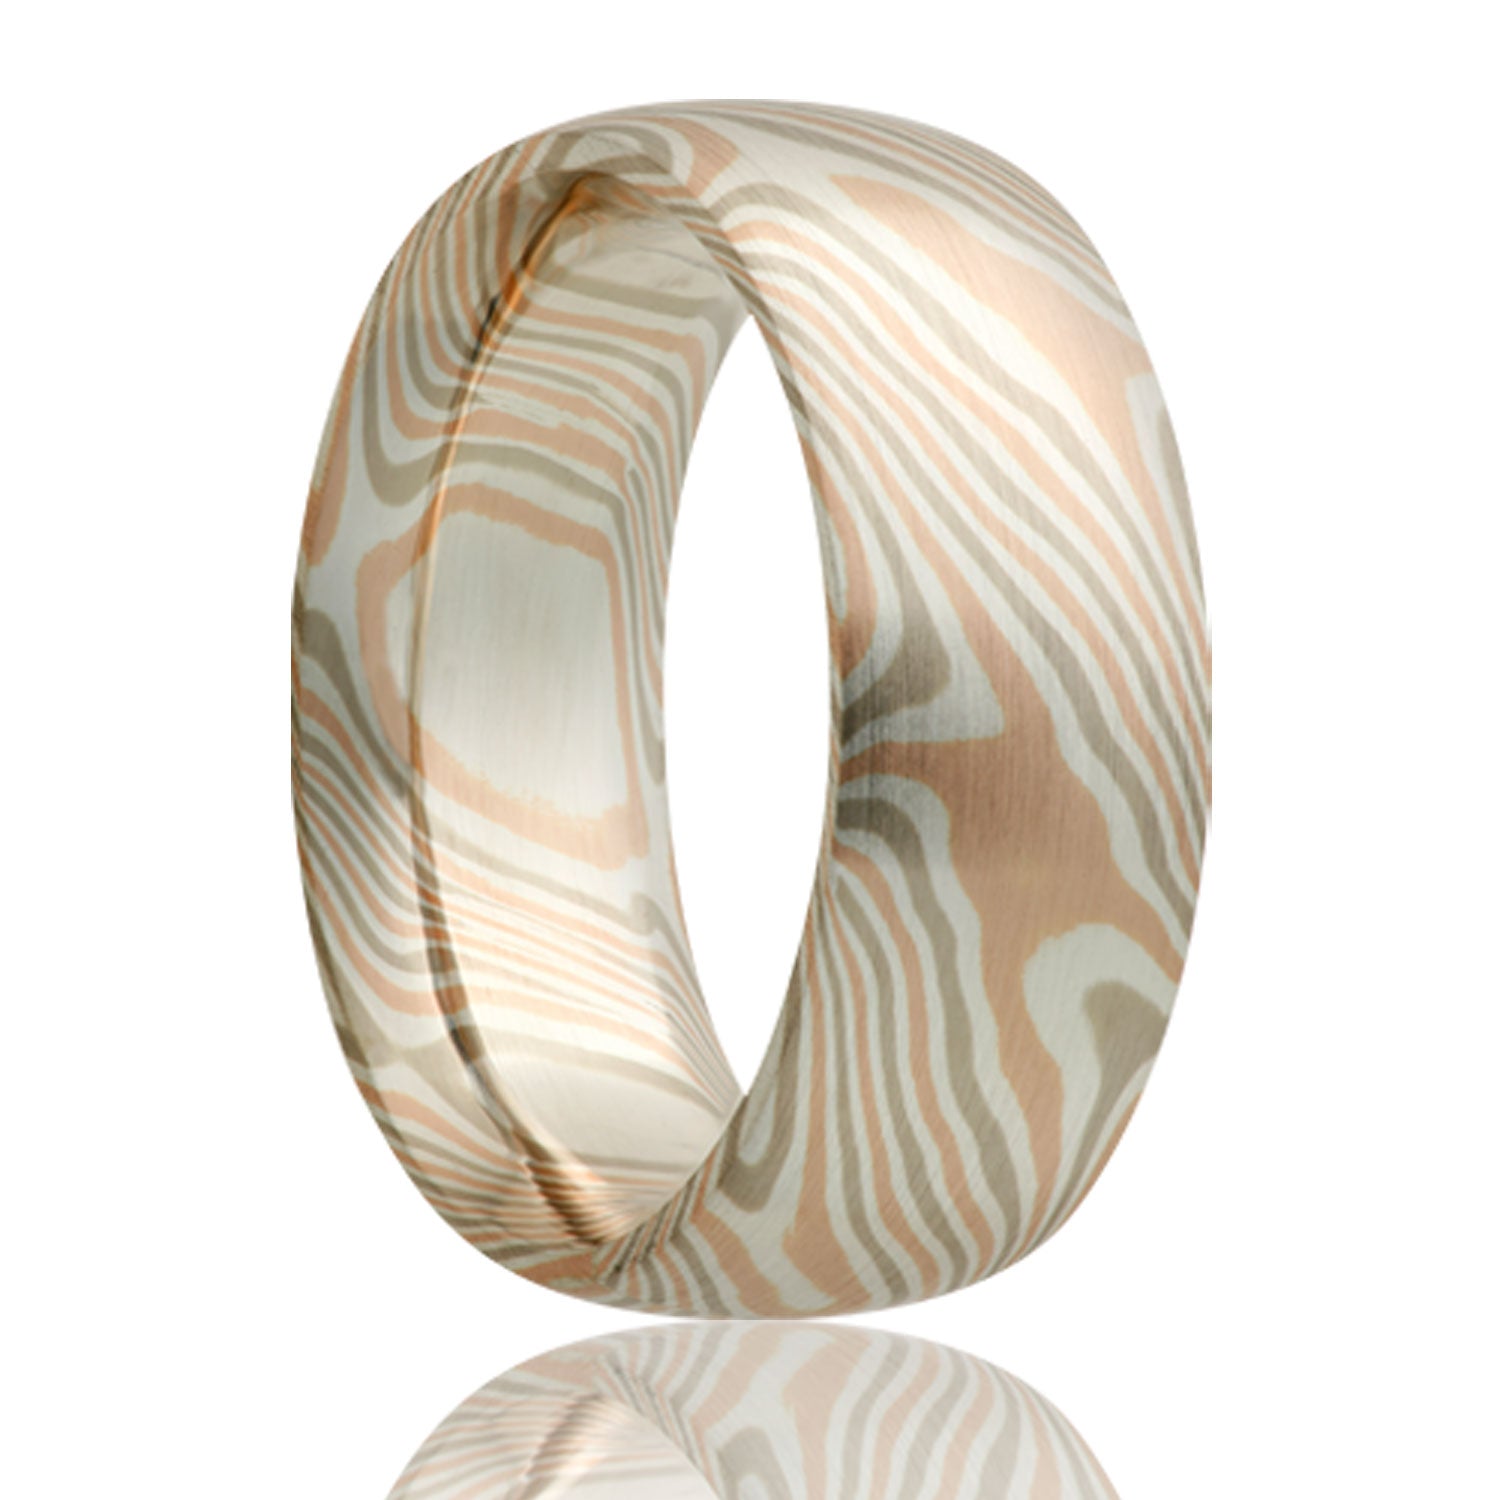 A 14k white & rose gold with sterling silver domed mokume gane wedding band displayed on a neutral white background.